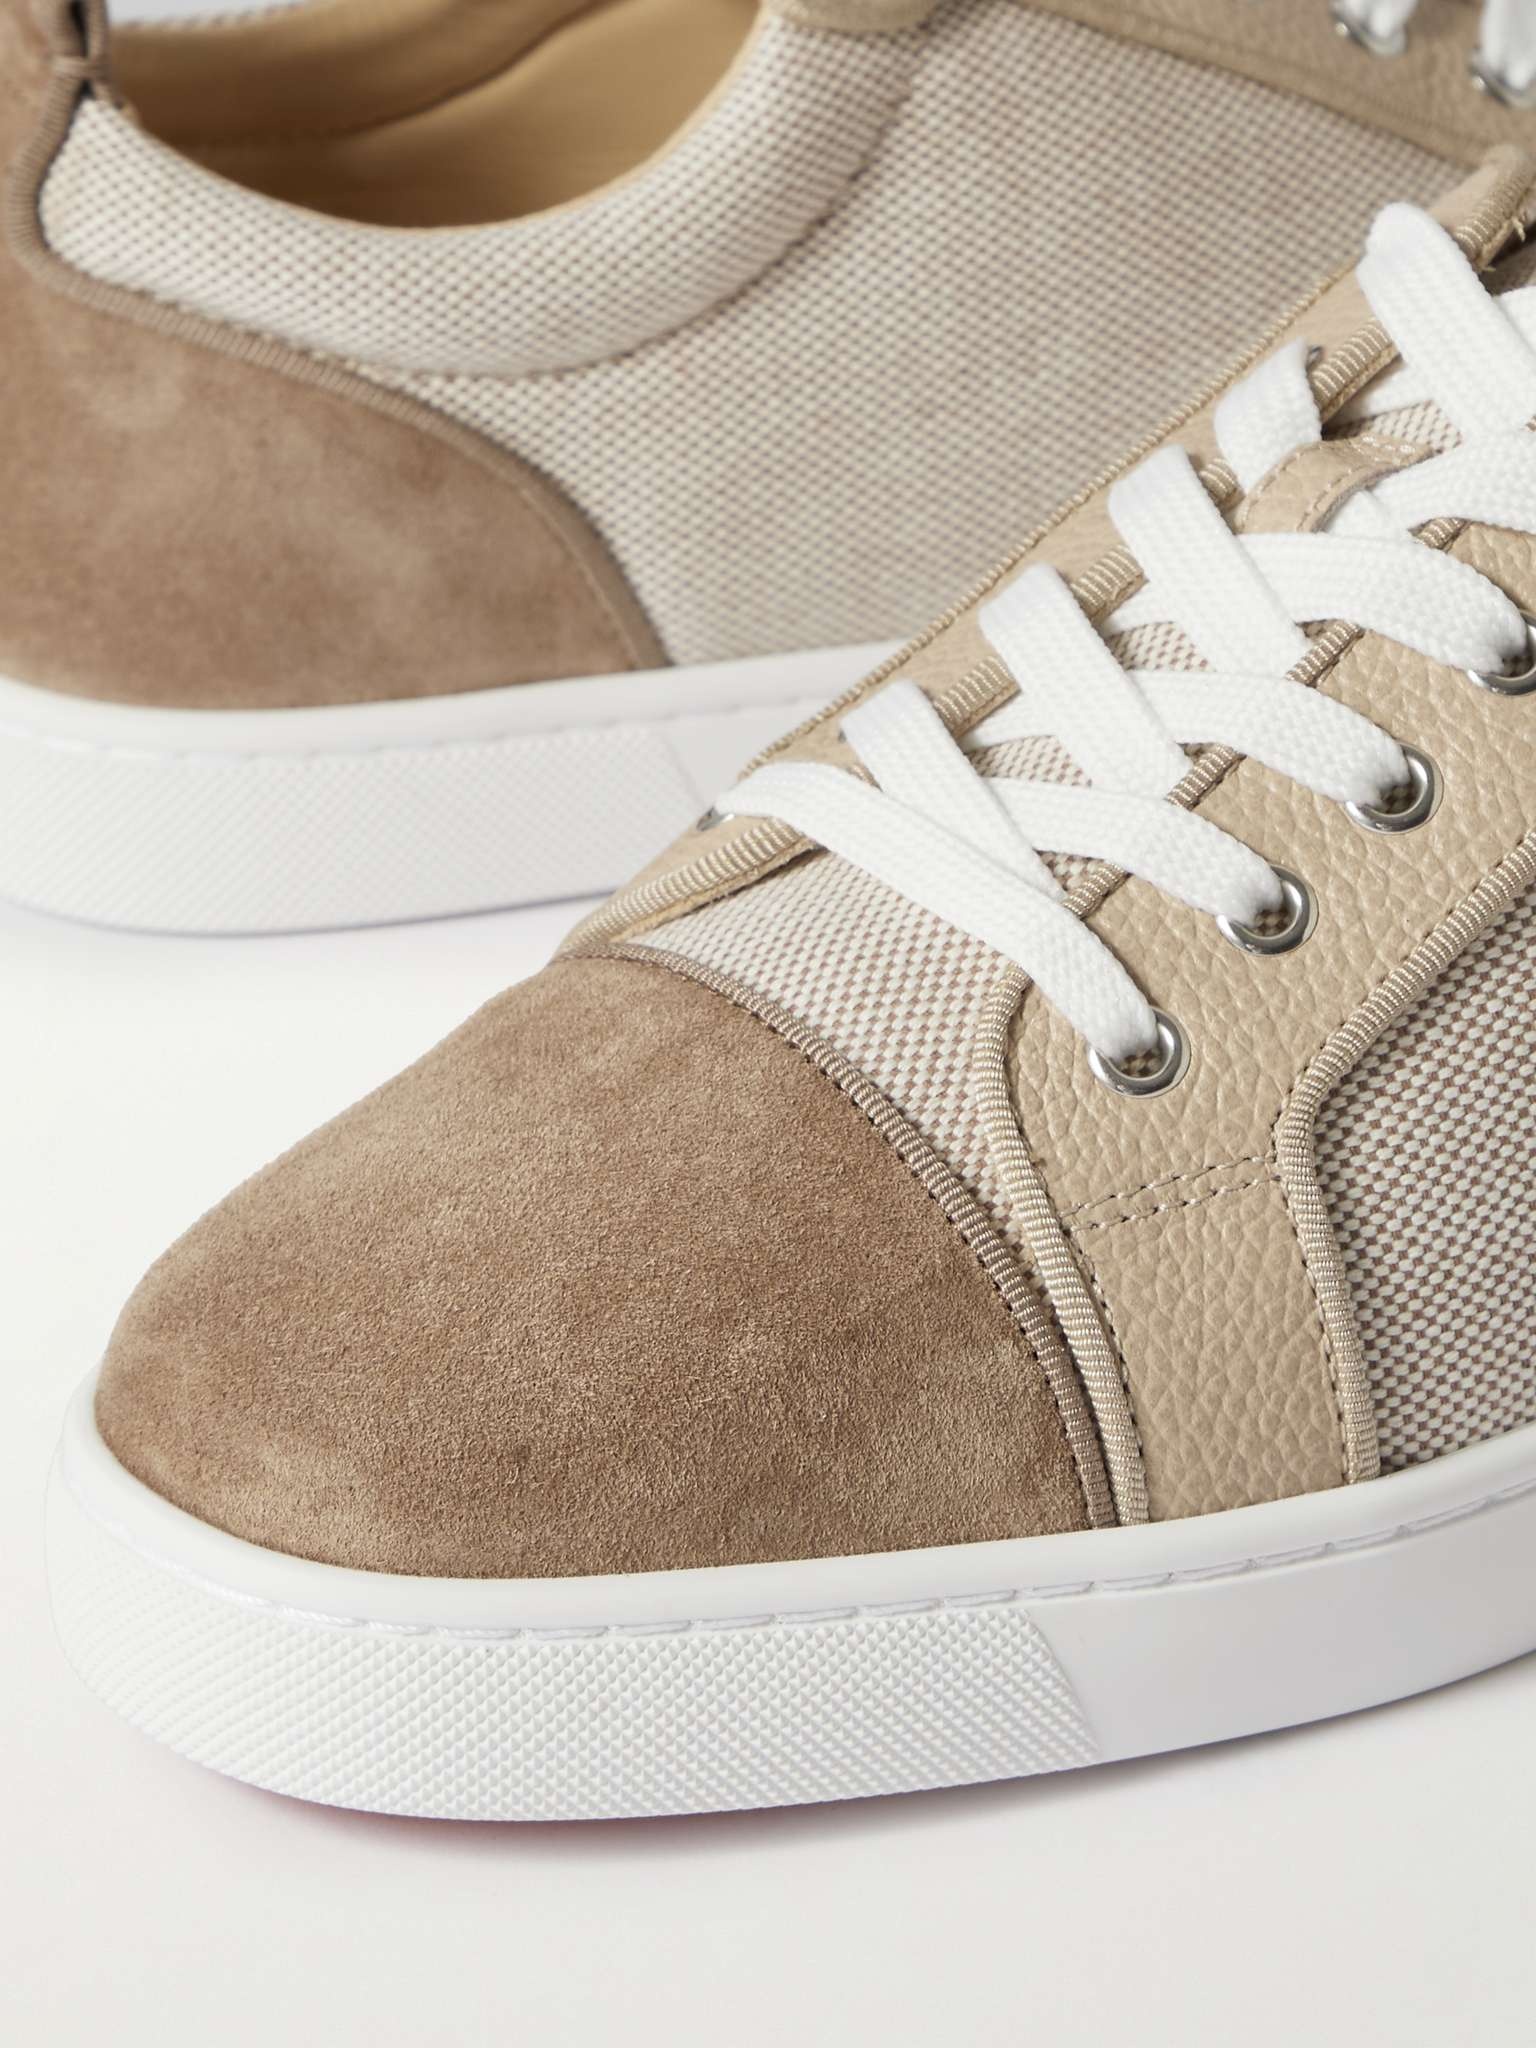 Louis Junior Linen, Leather and Suede Leather Sneakers - 6